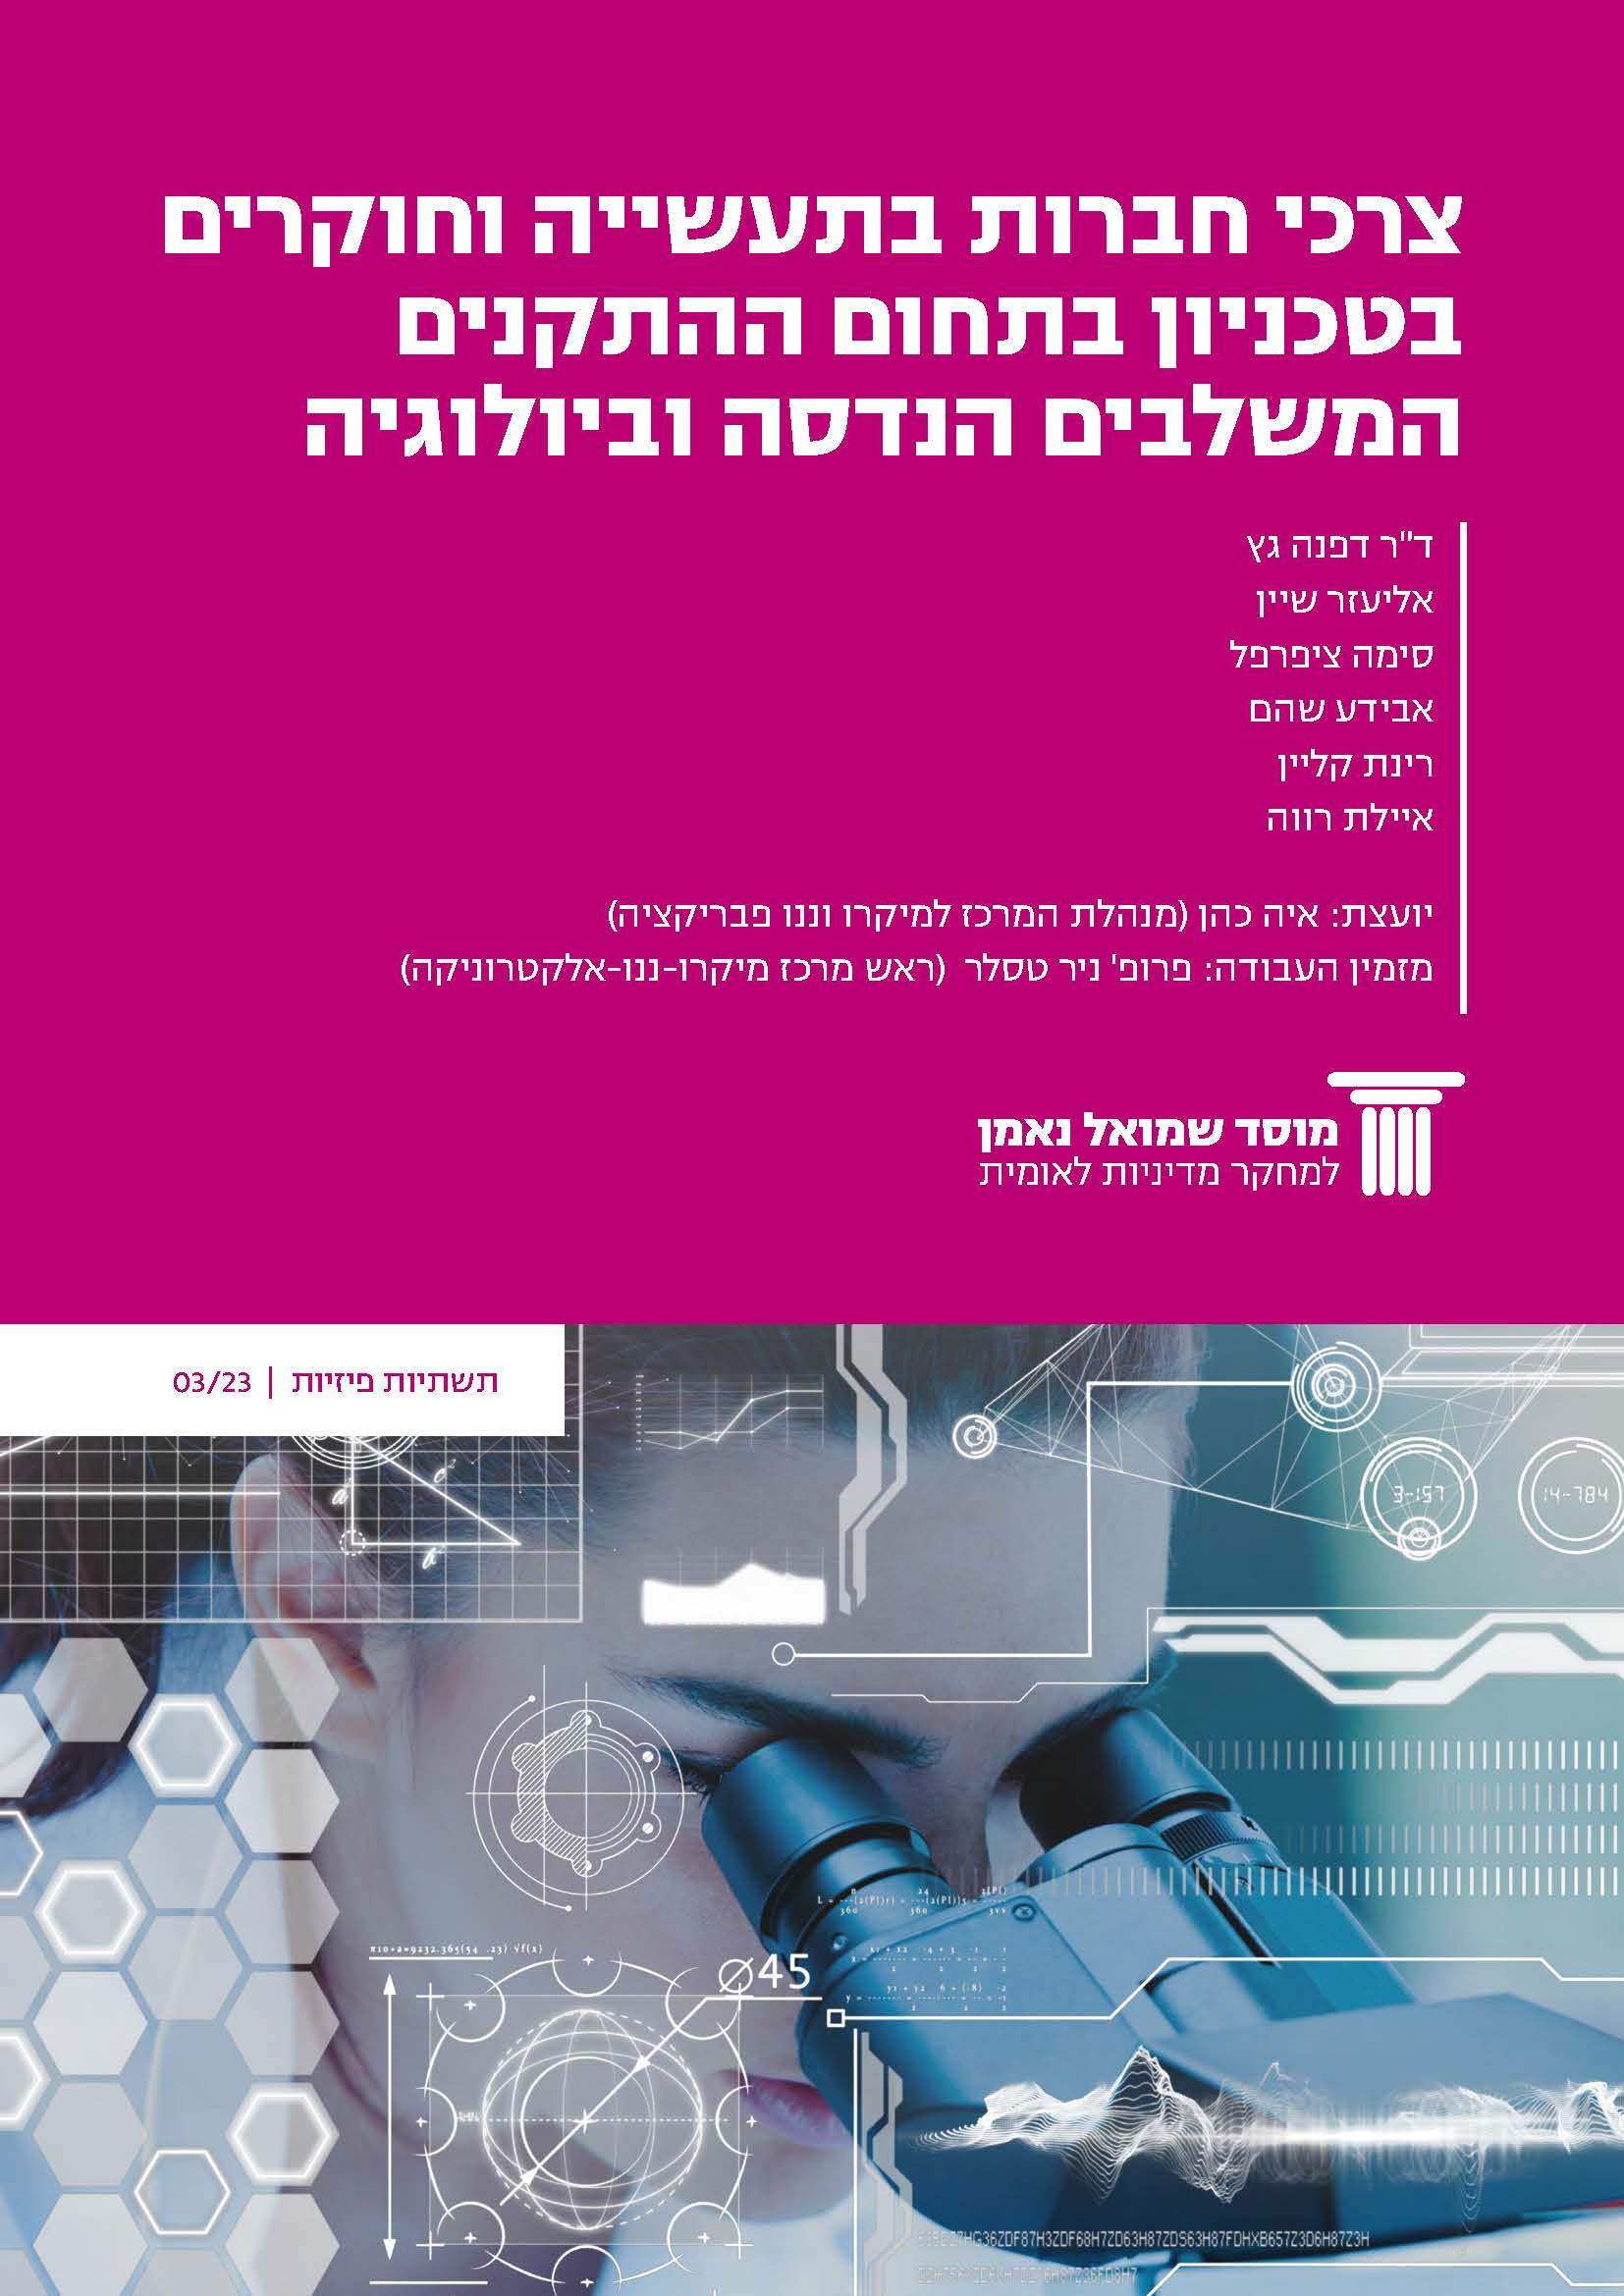 Requirements for bio-fabrication devices combining engineering and biology among Israeli companies and Technion researchers 